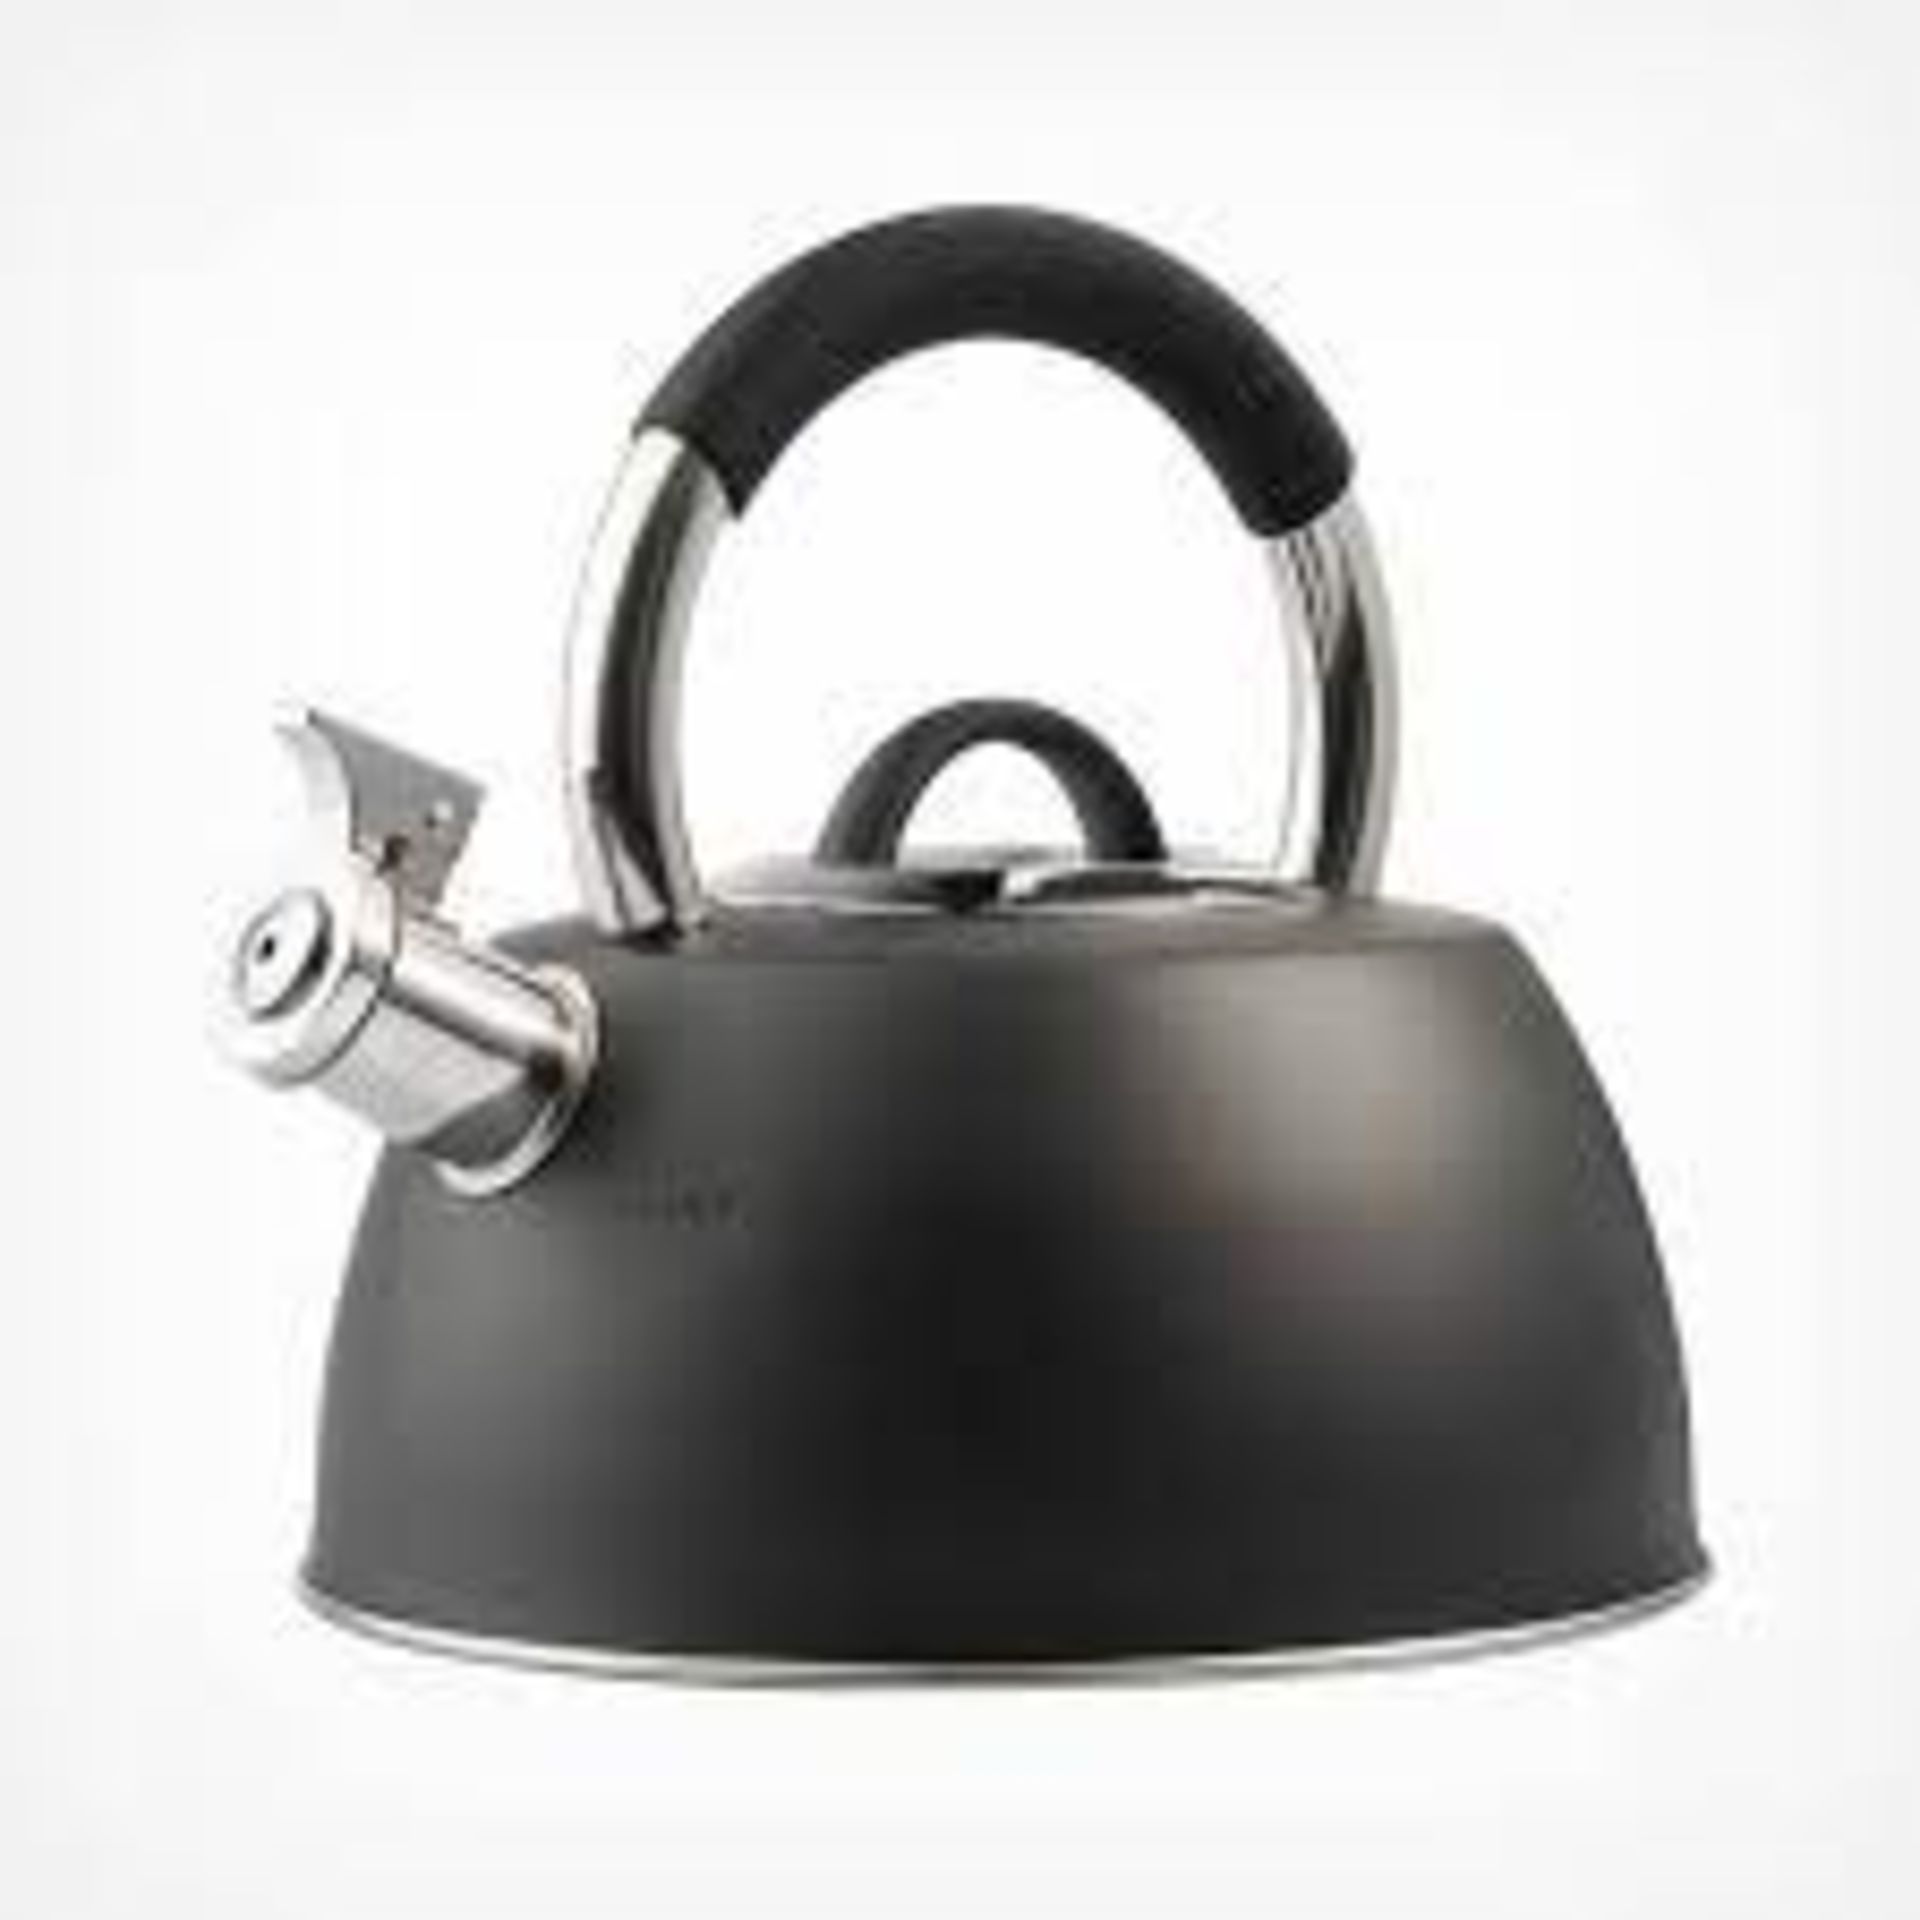 Black Stainless Steel Whistling Stove Top Kettle - 2.5L (SR3 1.2)If youâ€™re looking to add a